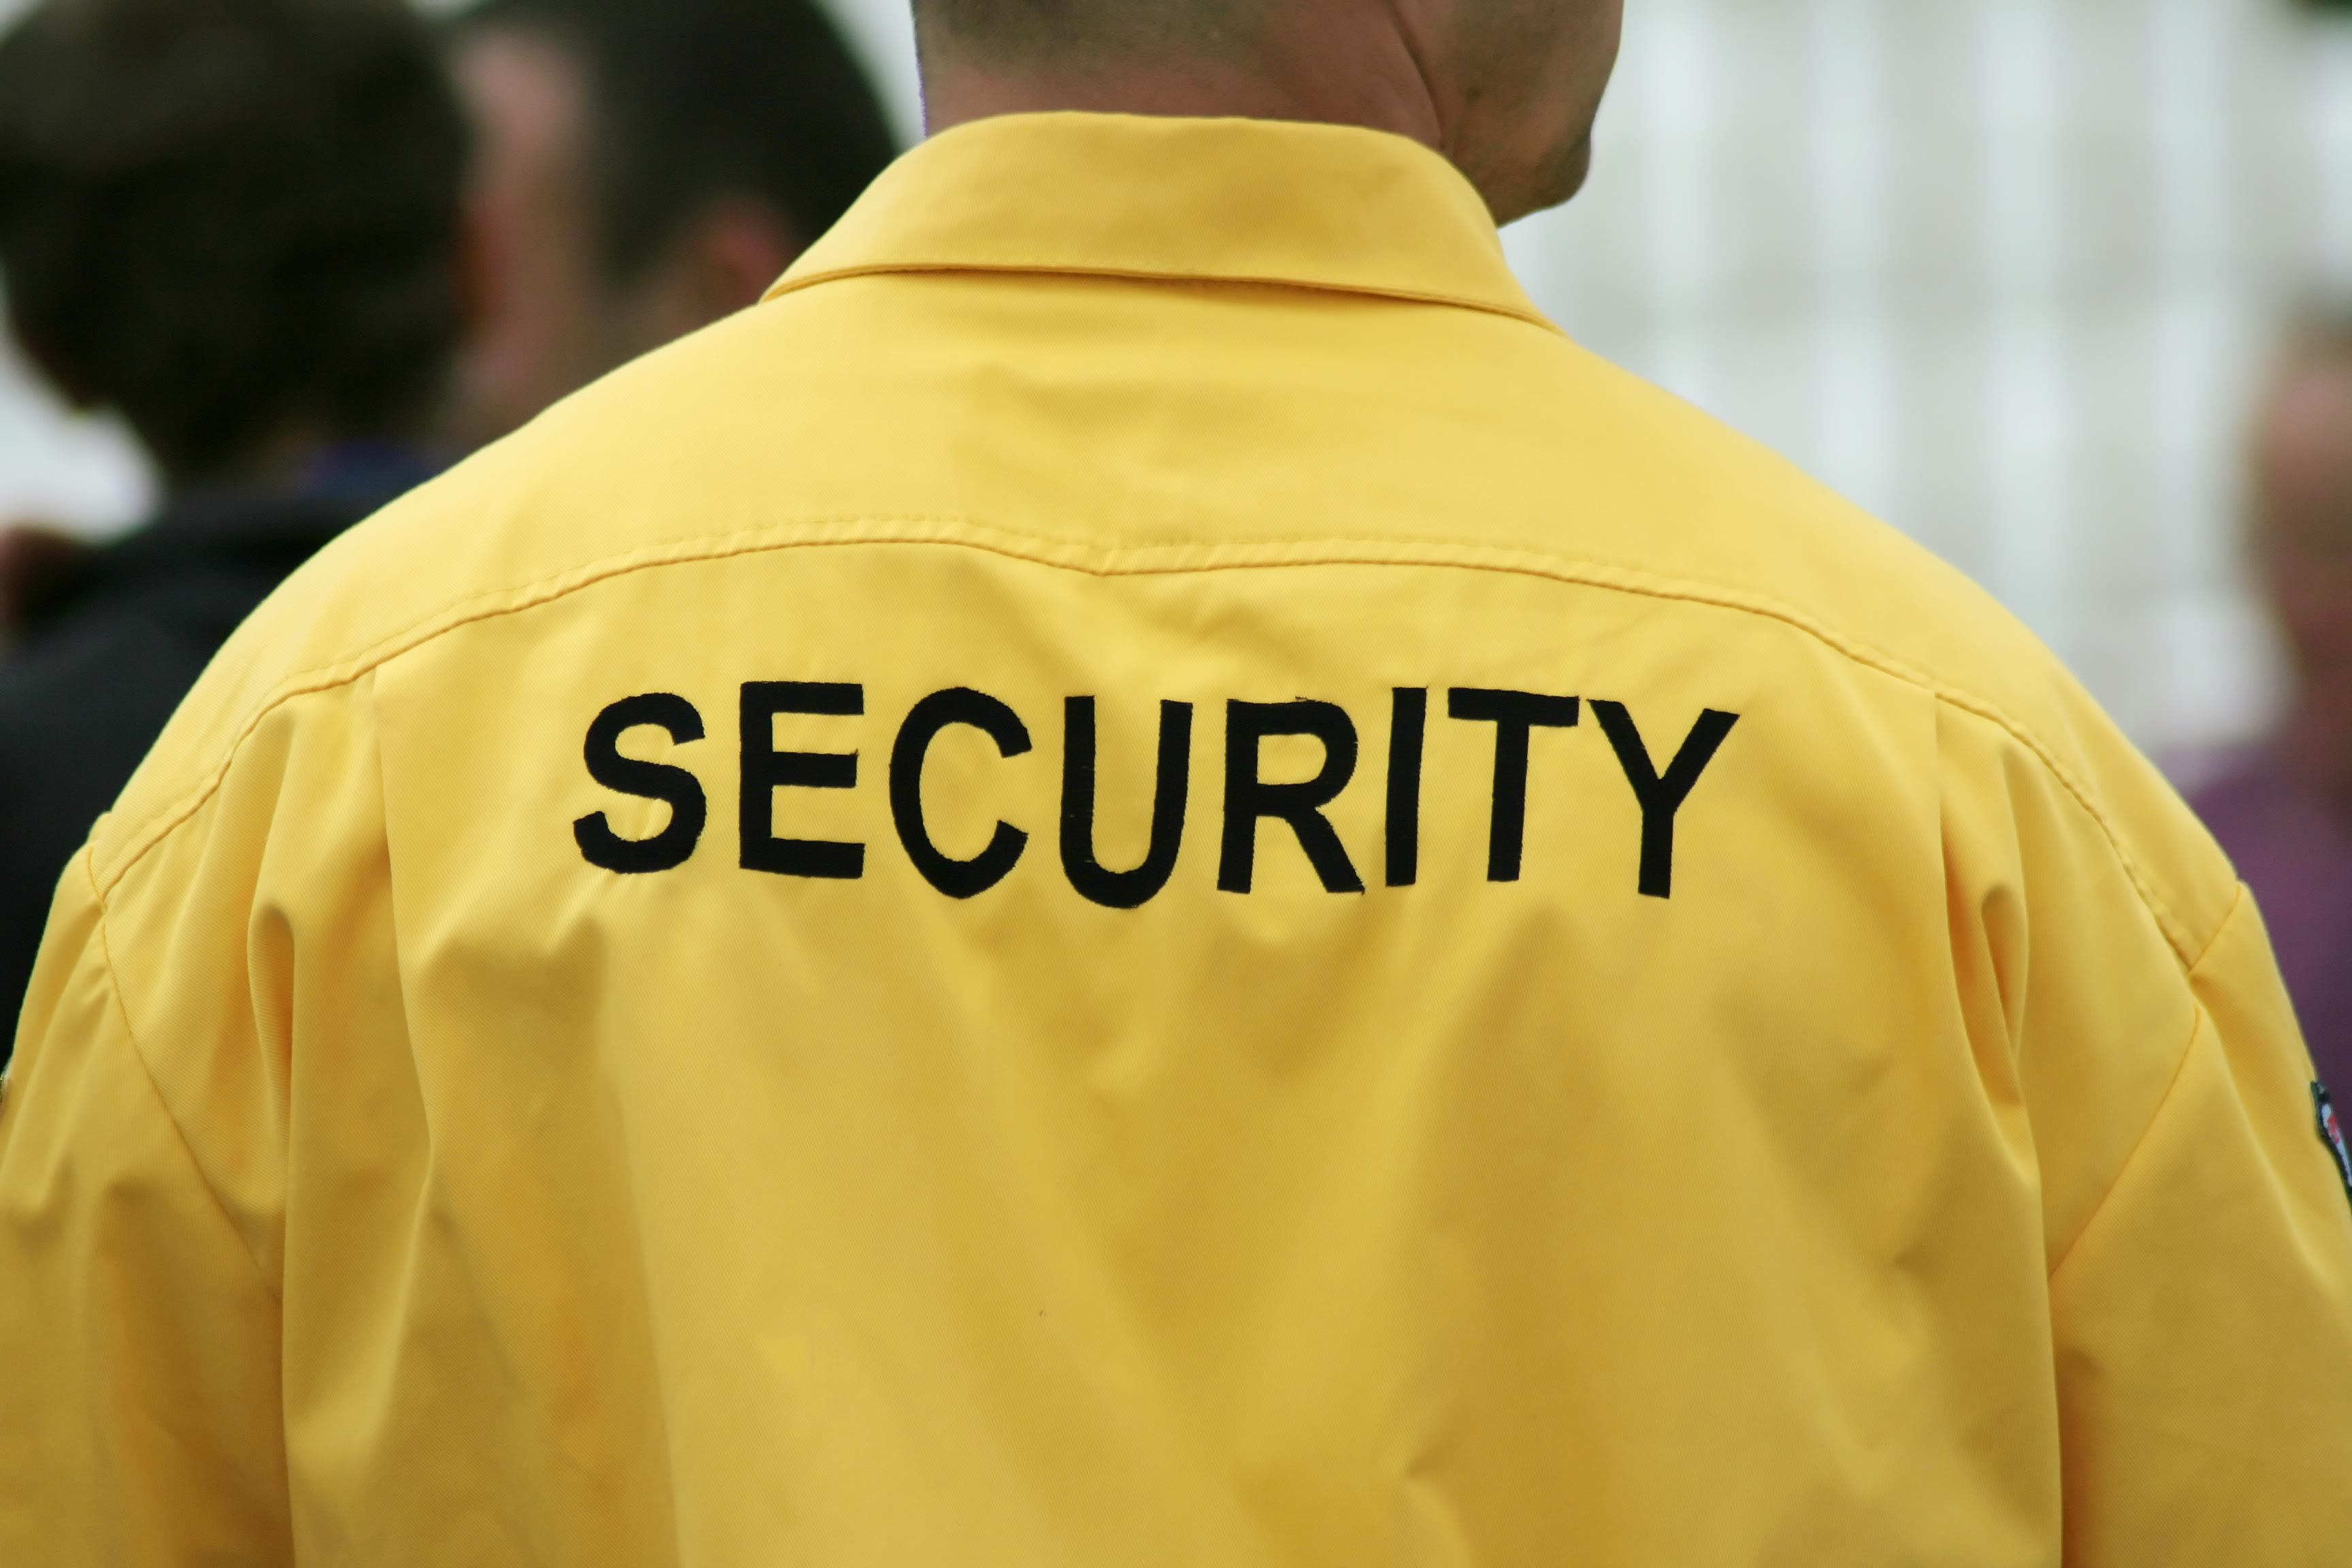 SECURITY GUARD TRAINING COURSES OFFERED AT ROCKLAND COMMUNITY COLLEGE